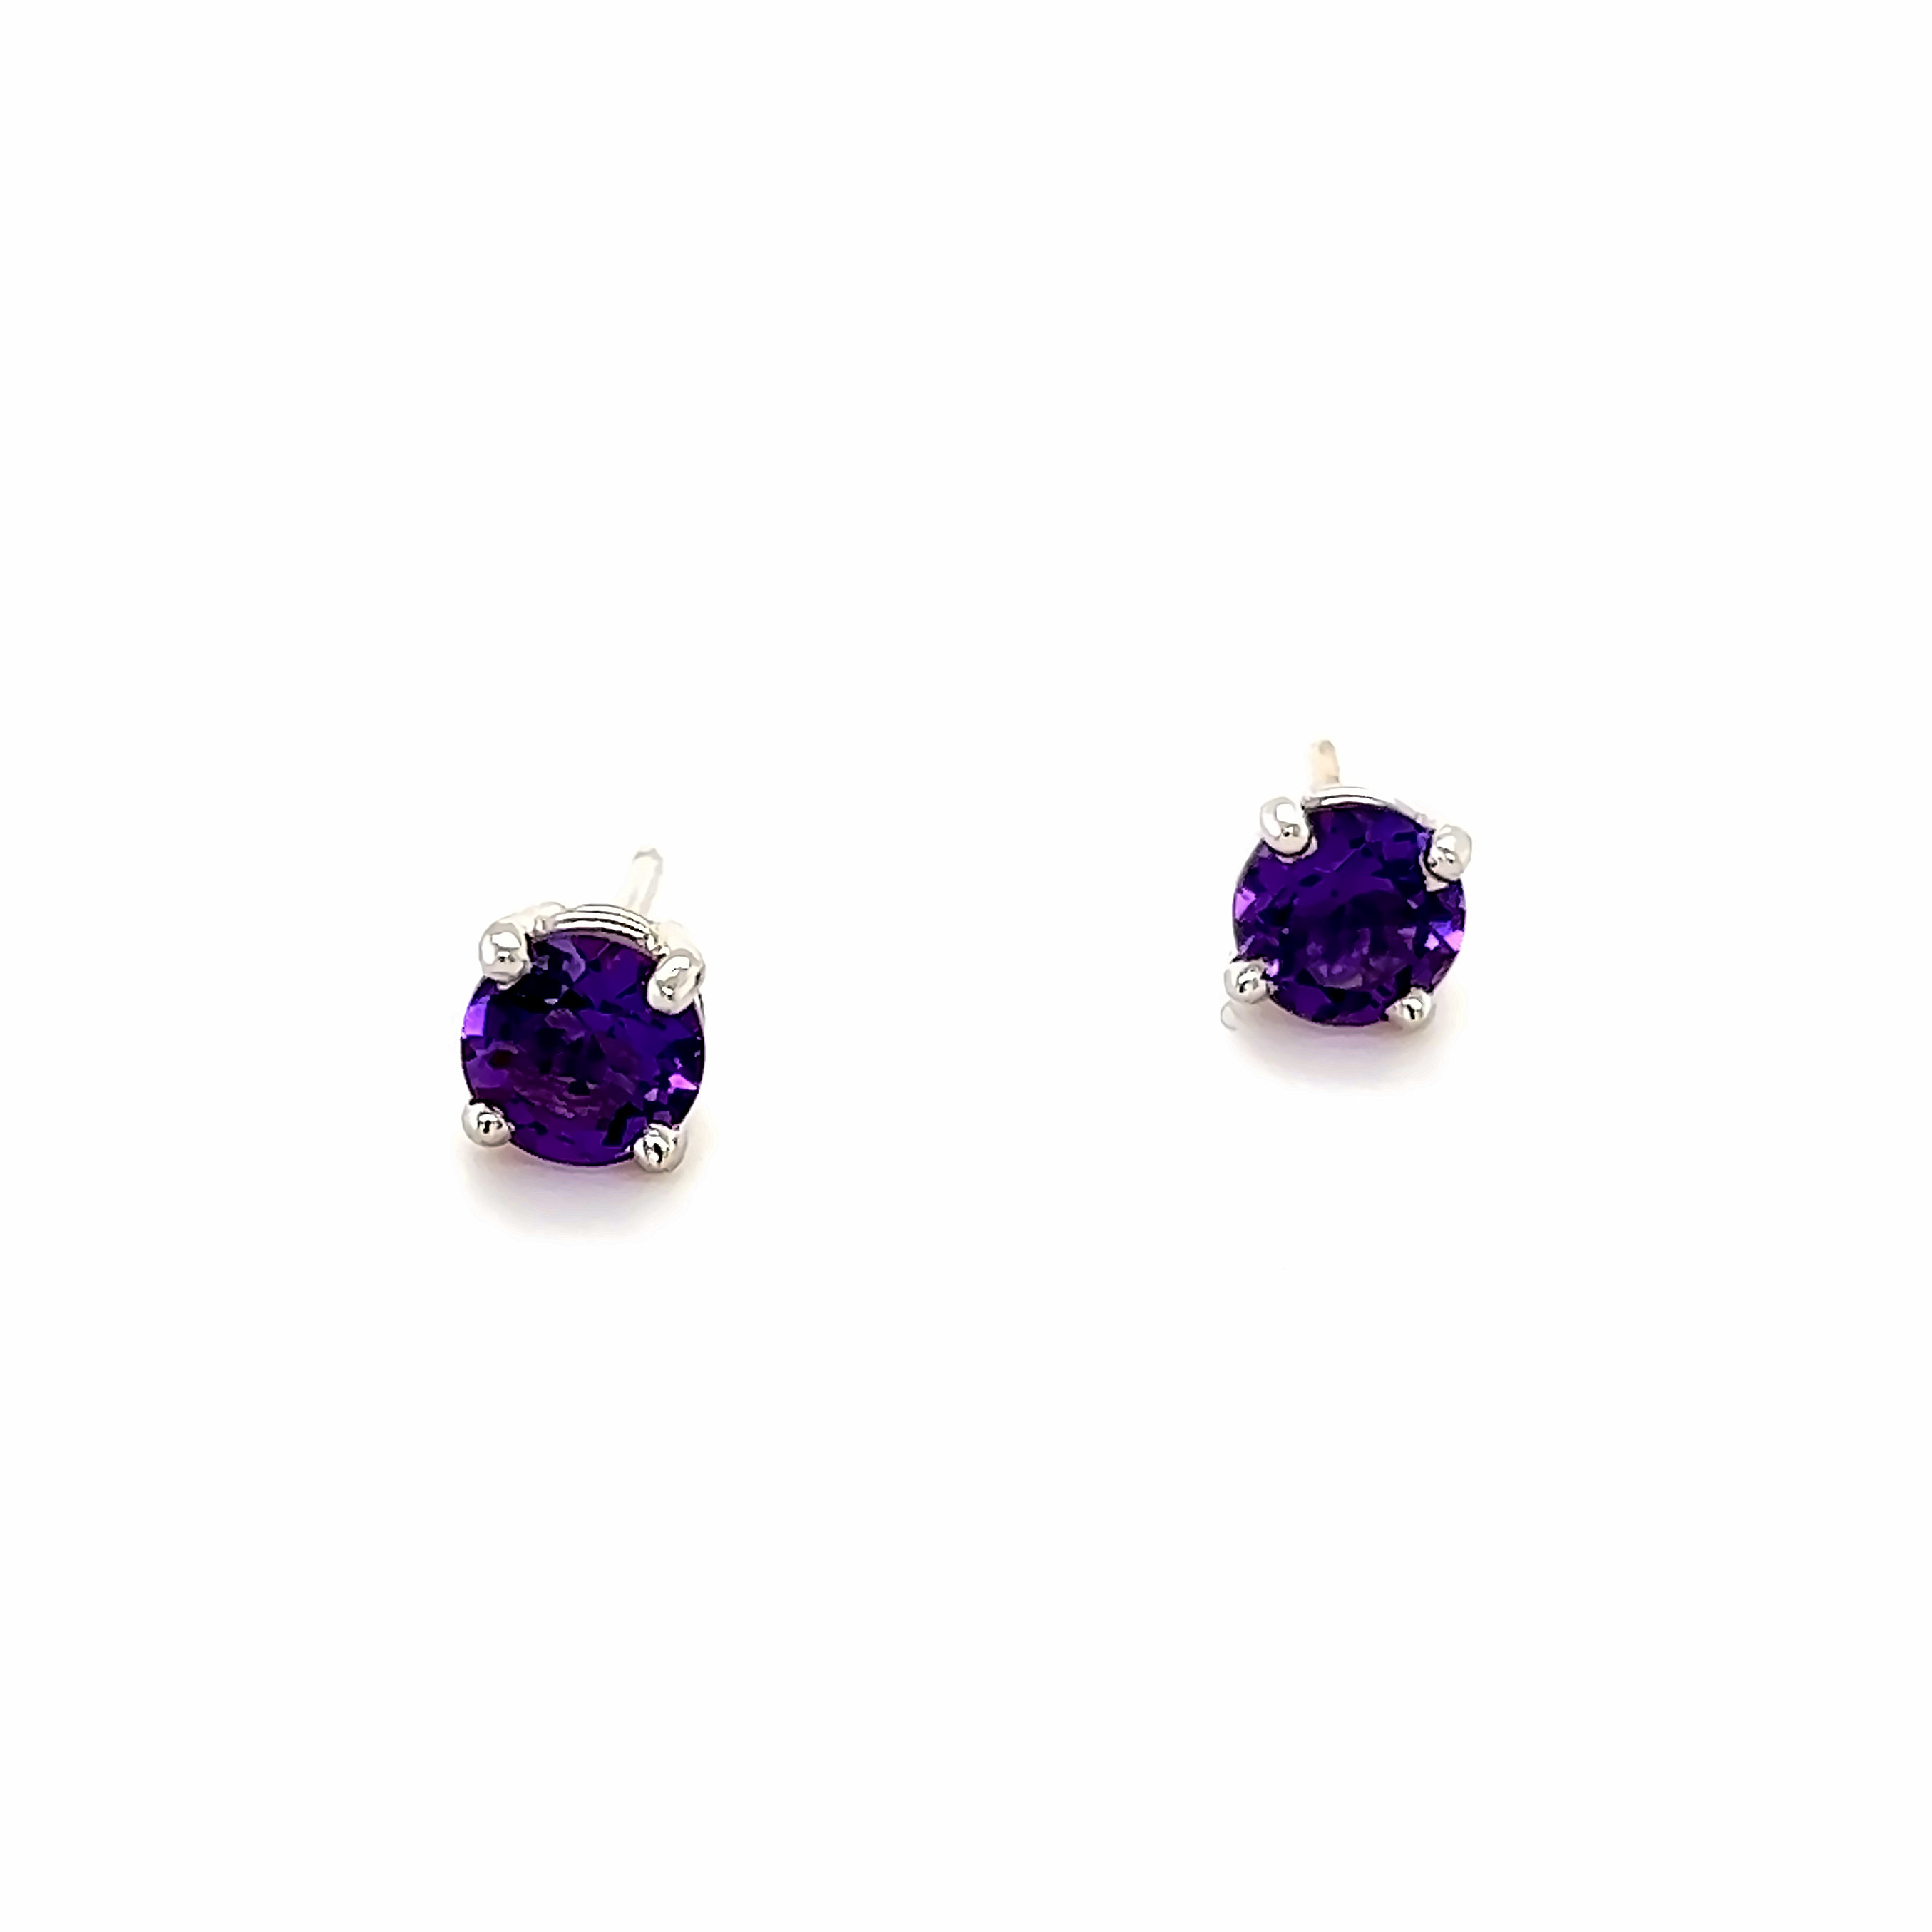 14 karat white gold stud earrings with 2=5.00mm round mixed cut Amethysts.